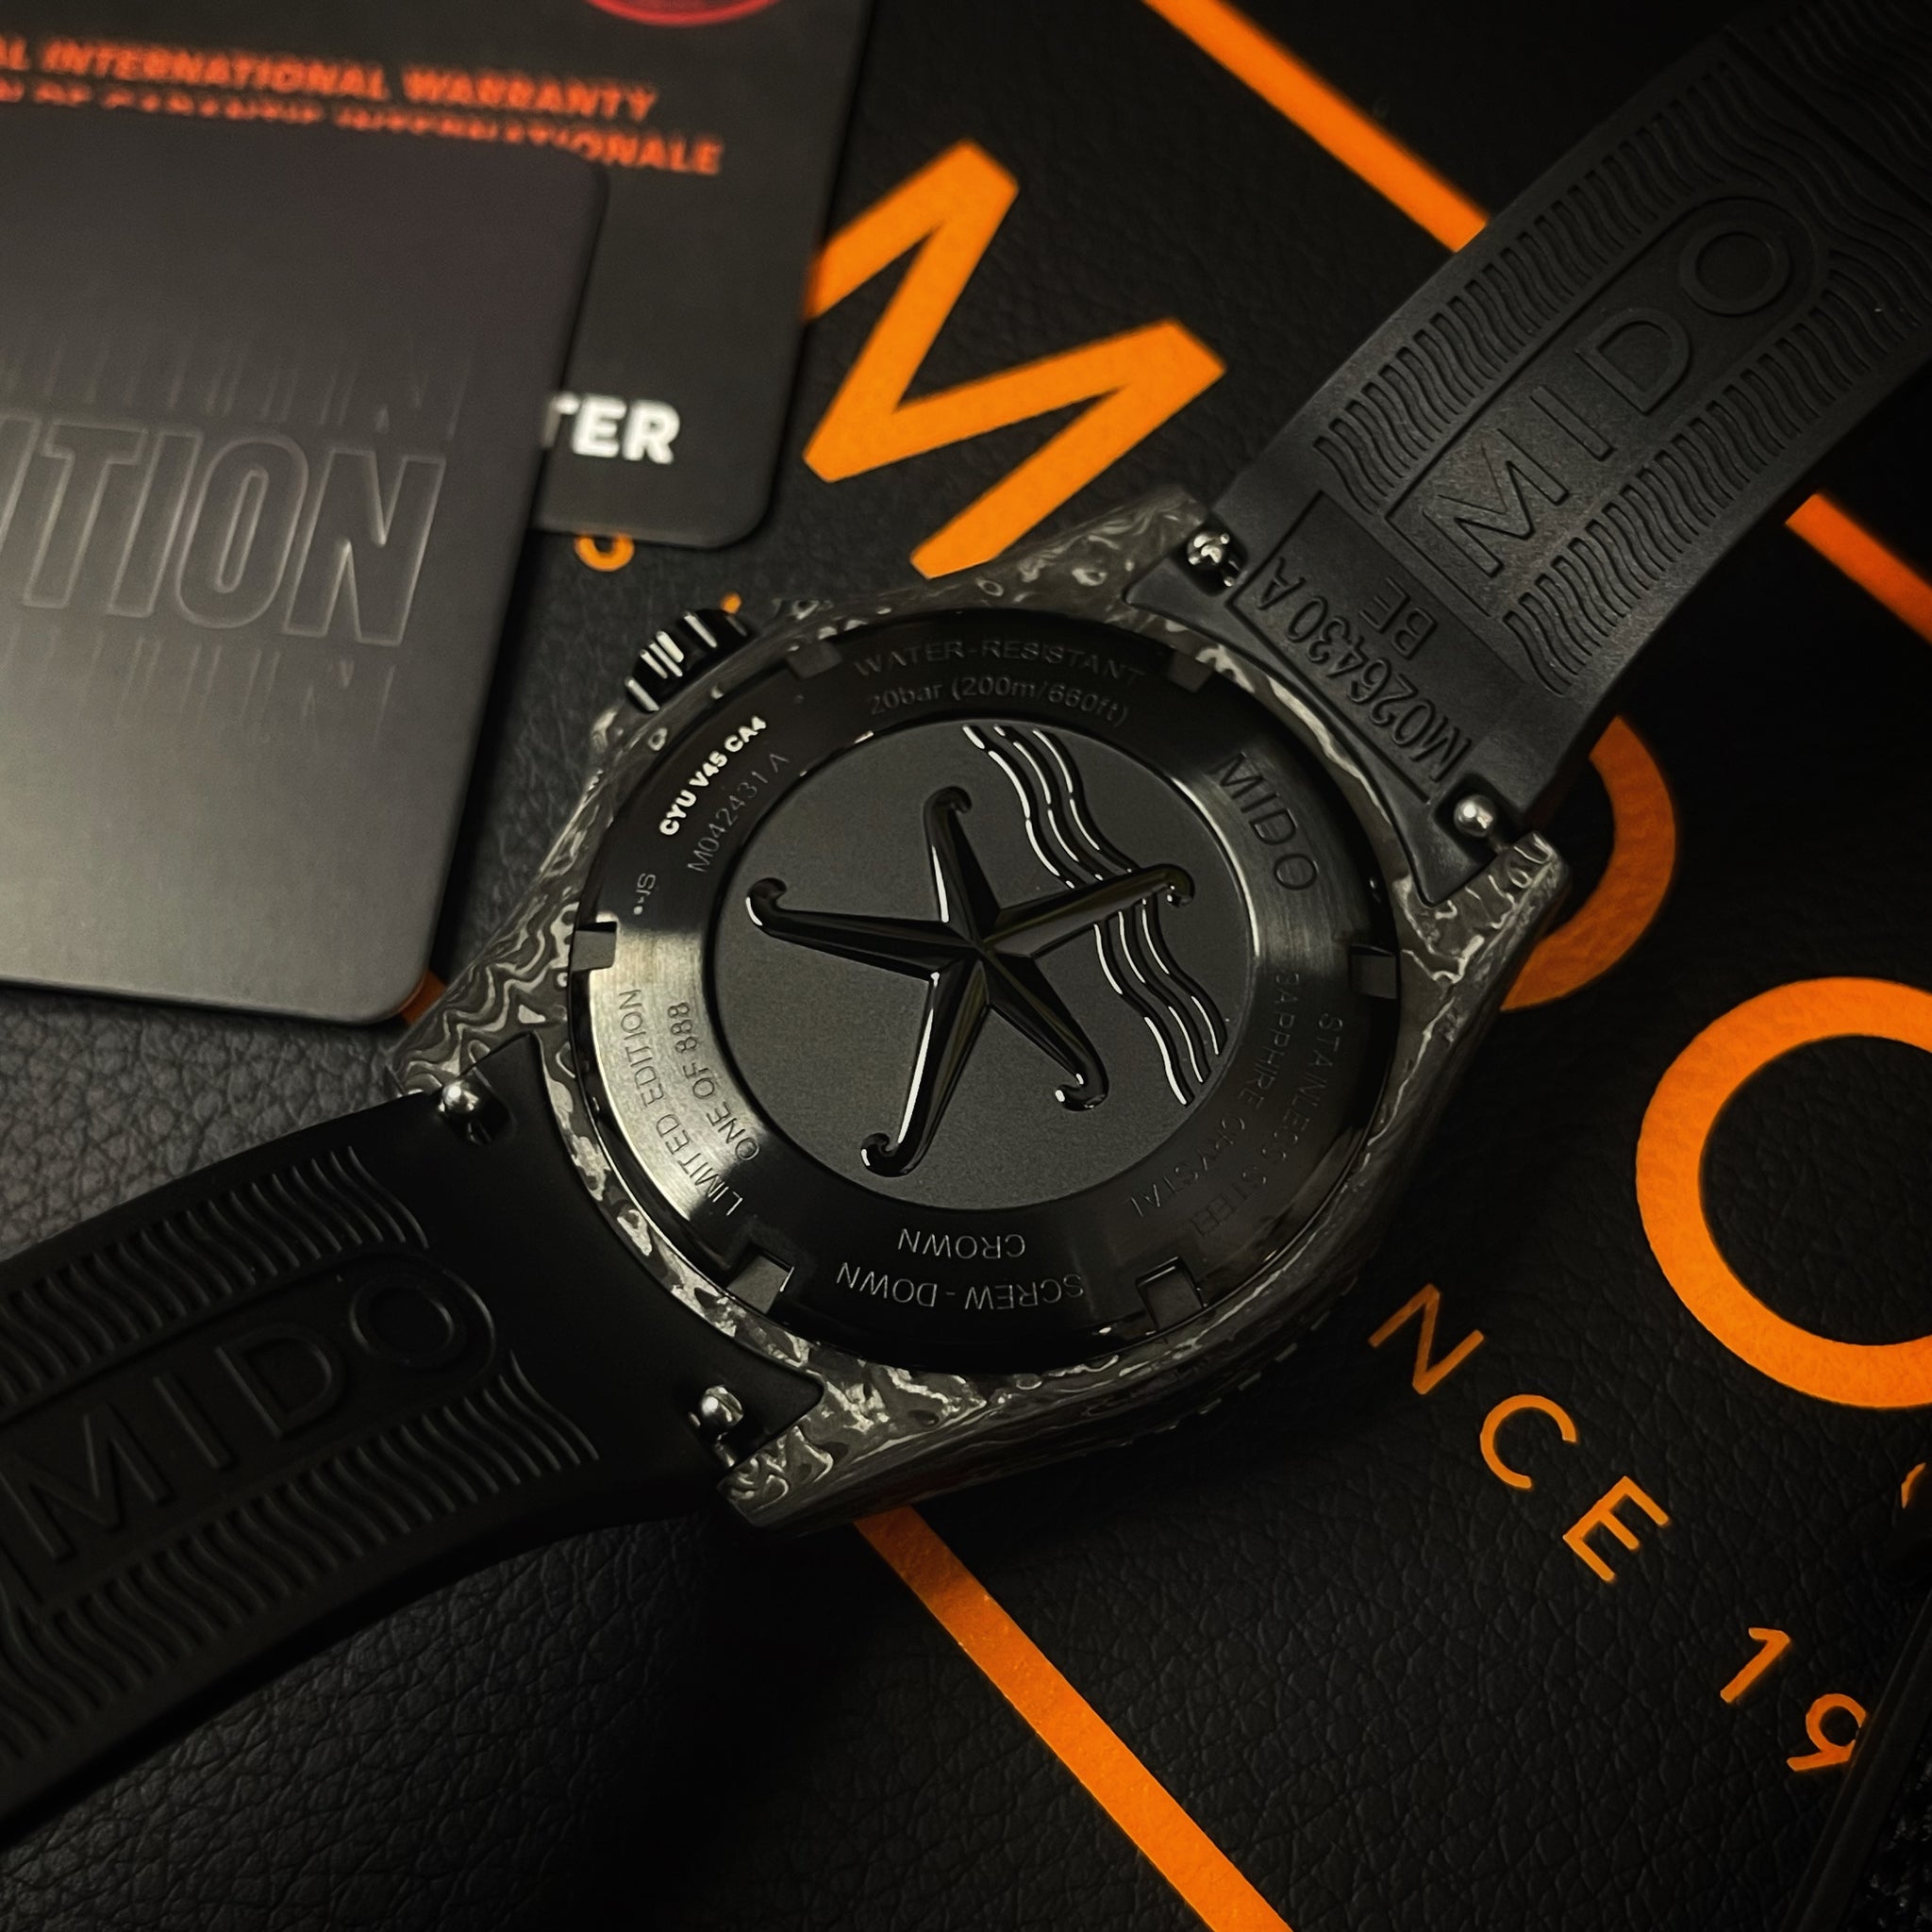 Mido - OCEAN STAR 200C CARBON EDITION LIMITED